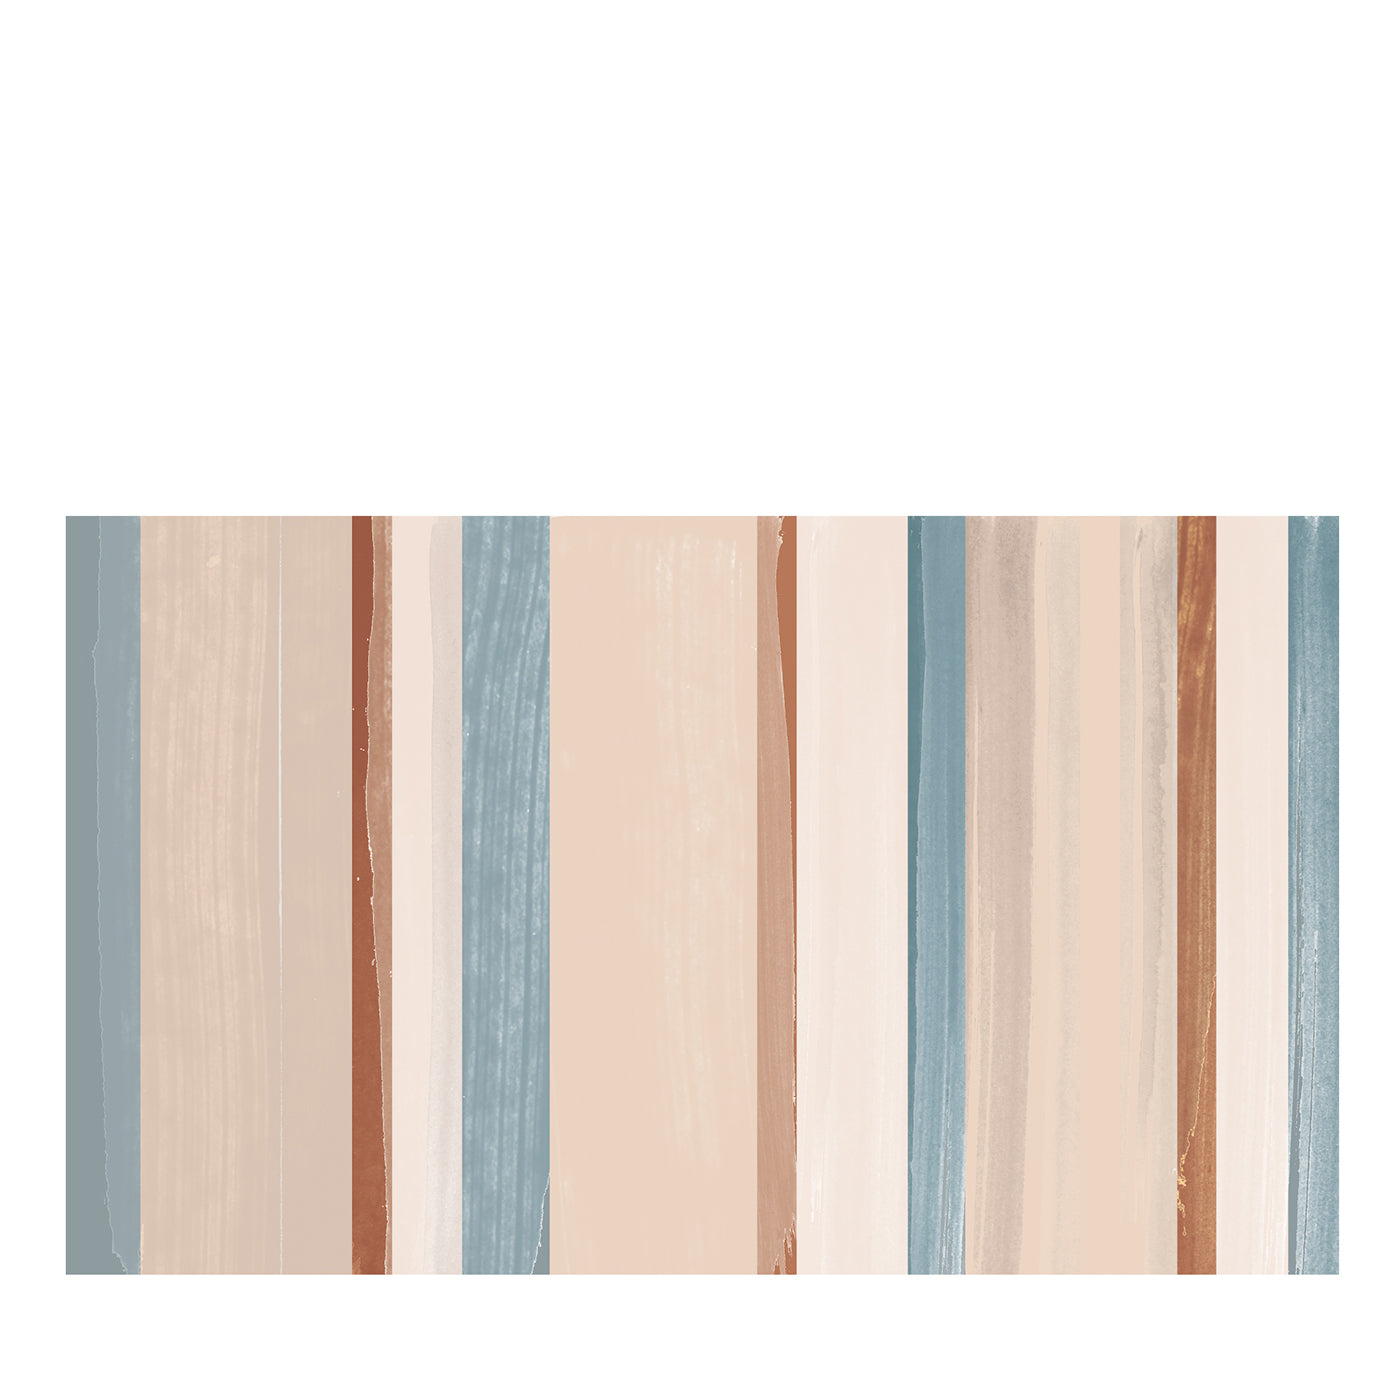 Brushed Stripes by Giulia Strizzi wallpaper#4 - Main view